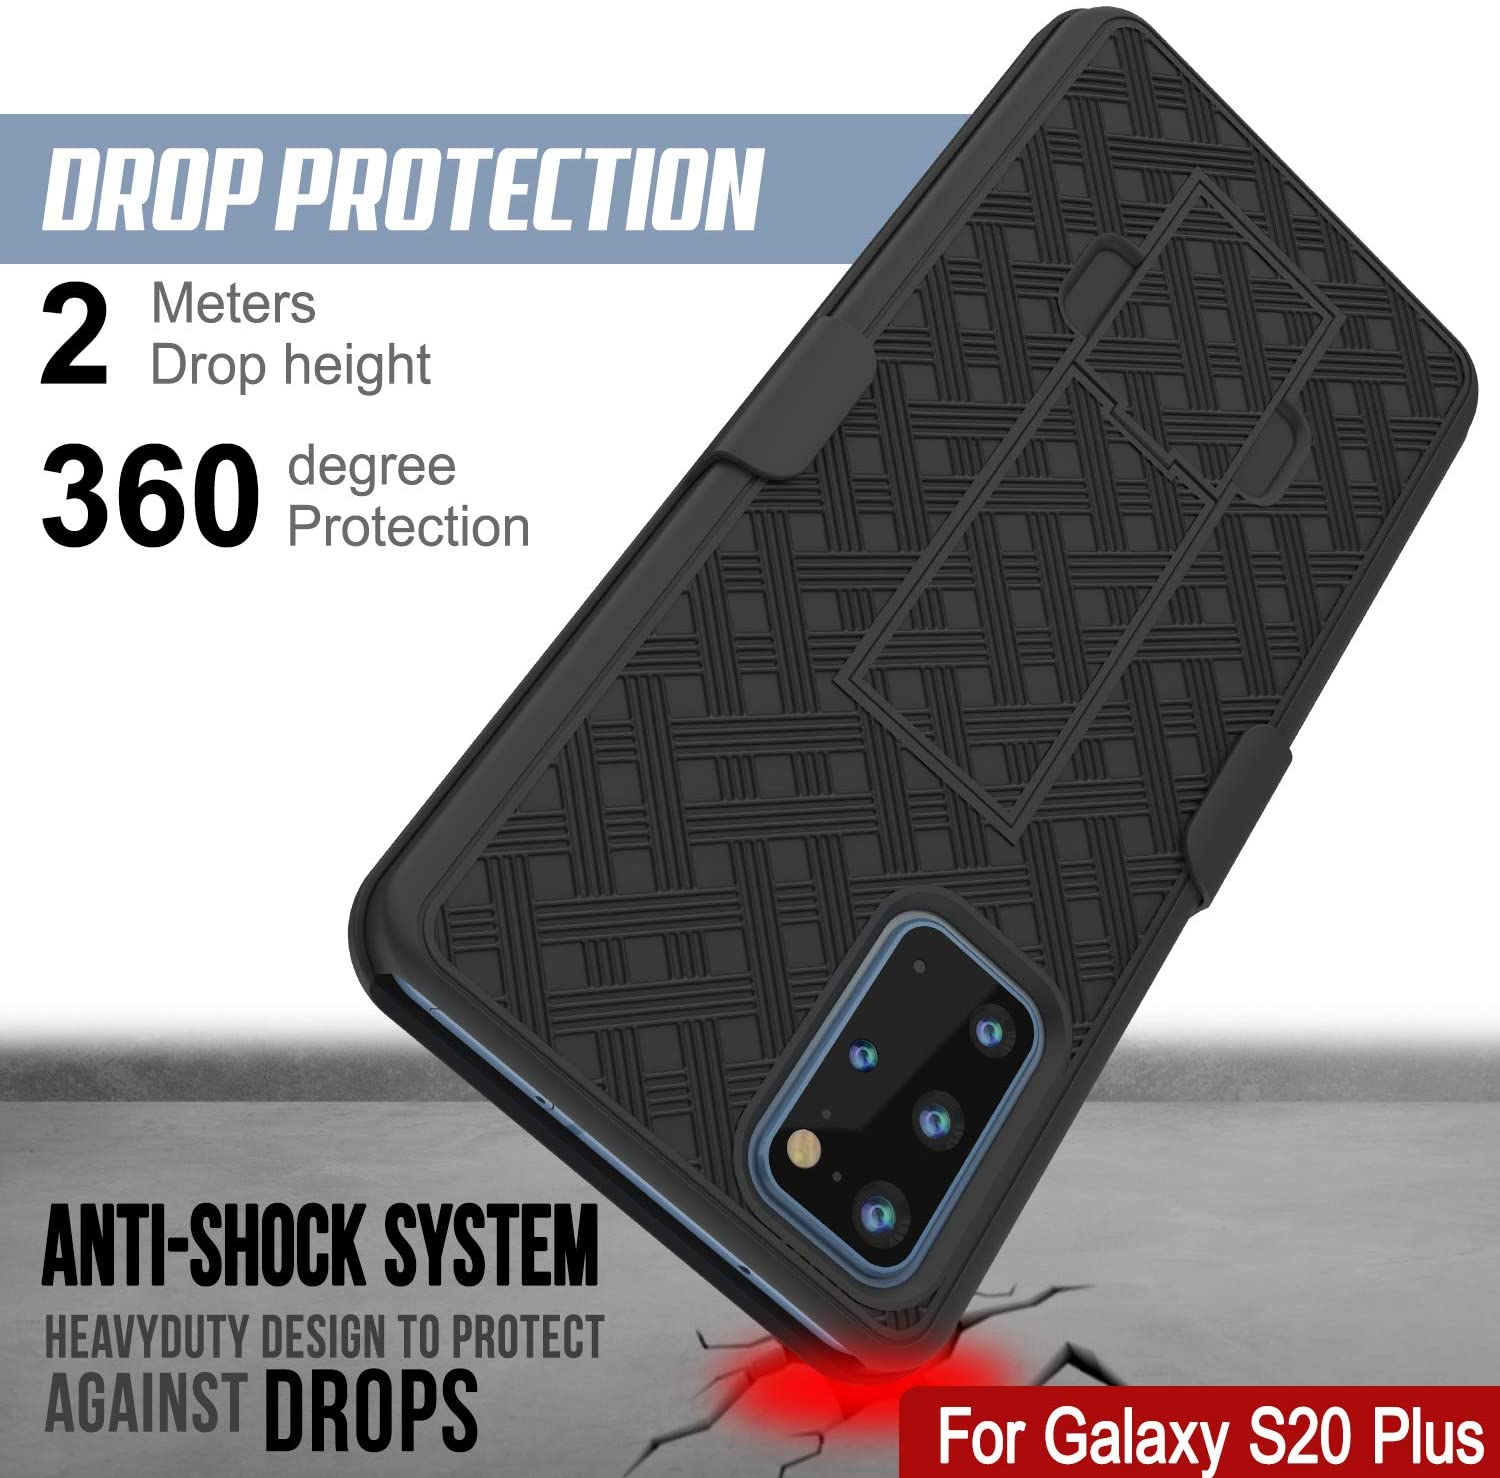 Galaxy S24 Plus Case, Punkcase Holster Belt Clip With Screen Protector [White]